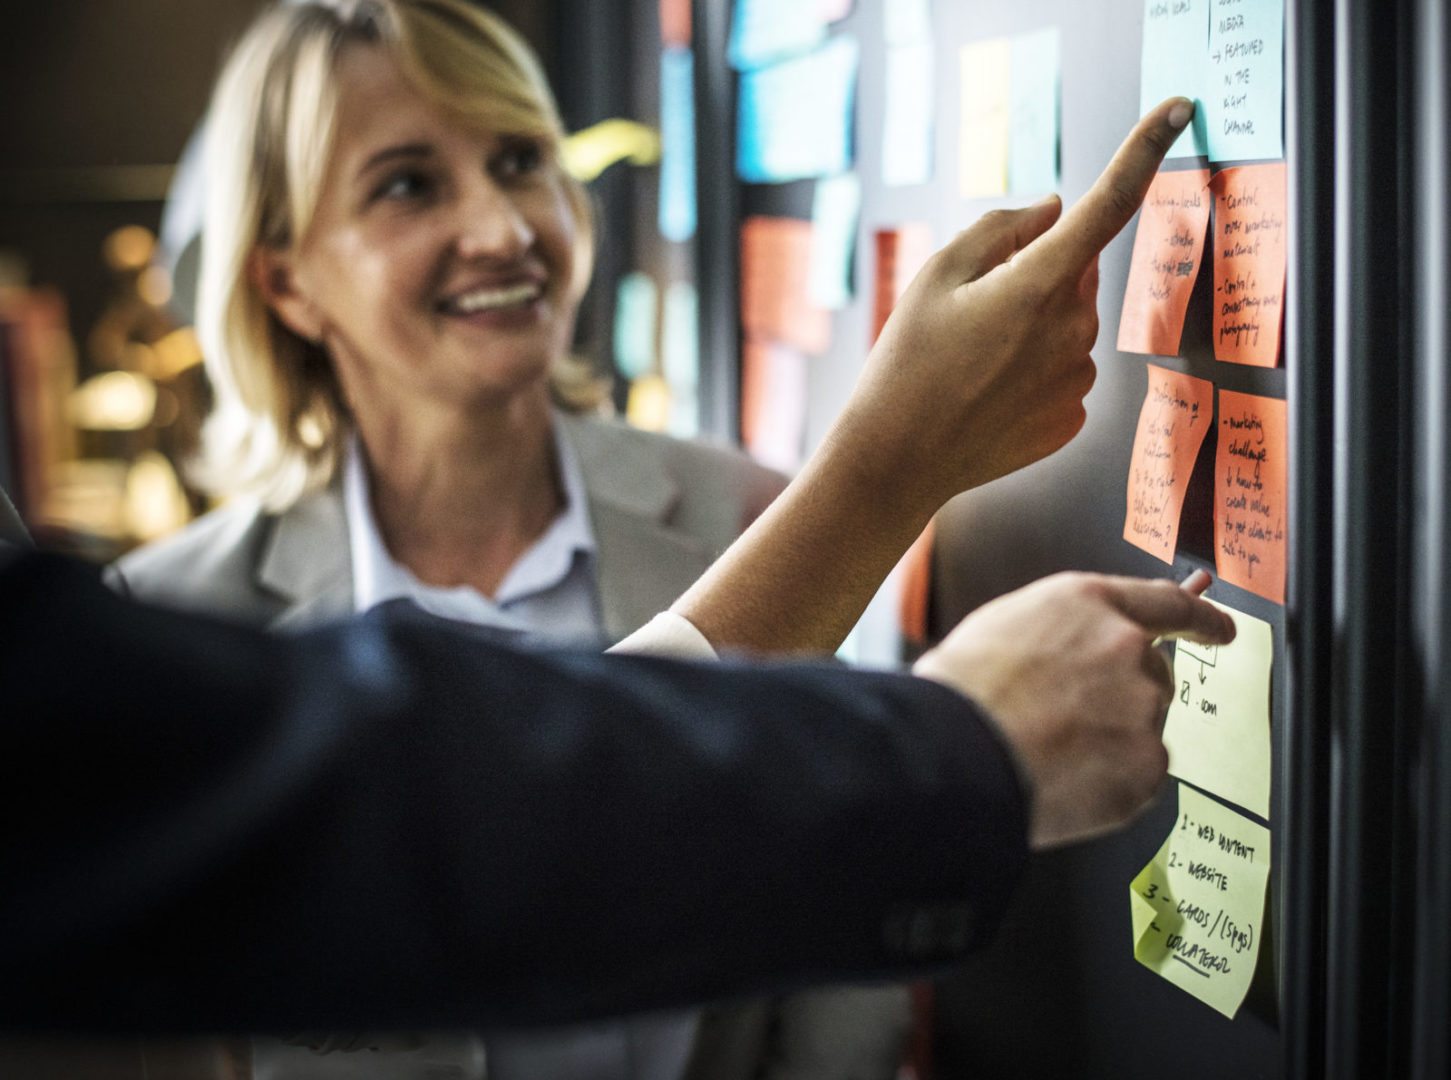 Collaborating at a board with sticky notes